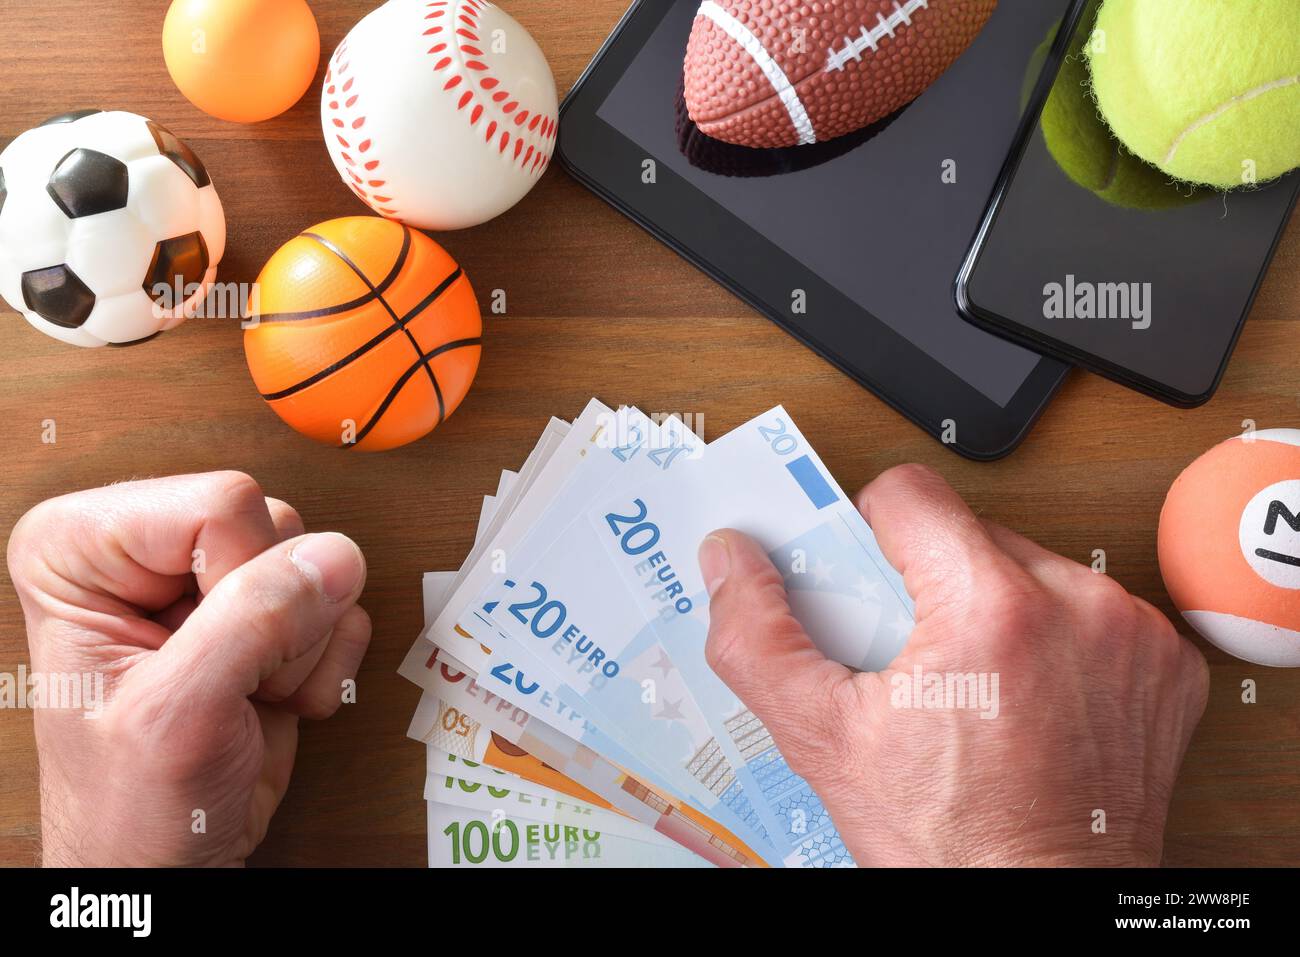 Concept of online sports betting with smartphone and tablet on wooden table with objects representing different sports and hands with money in hand to Stock Photo